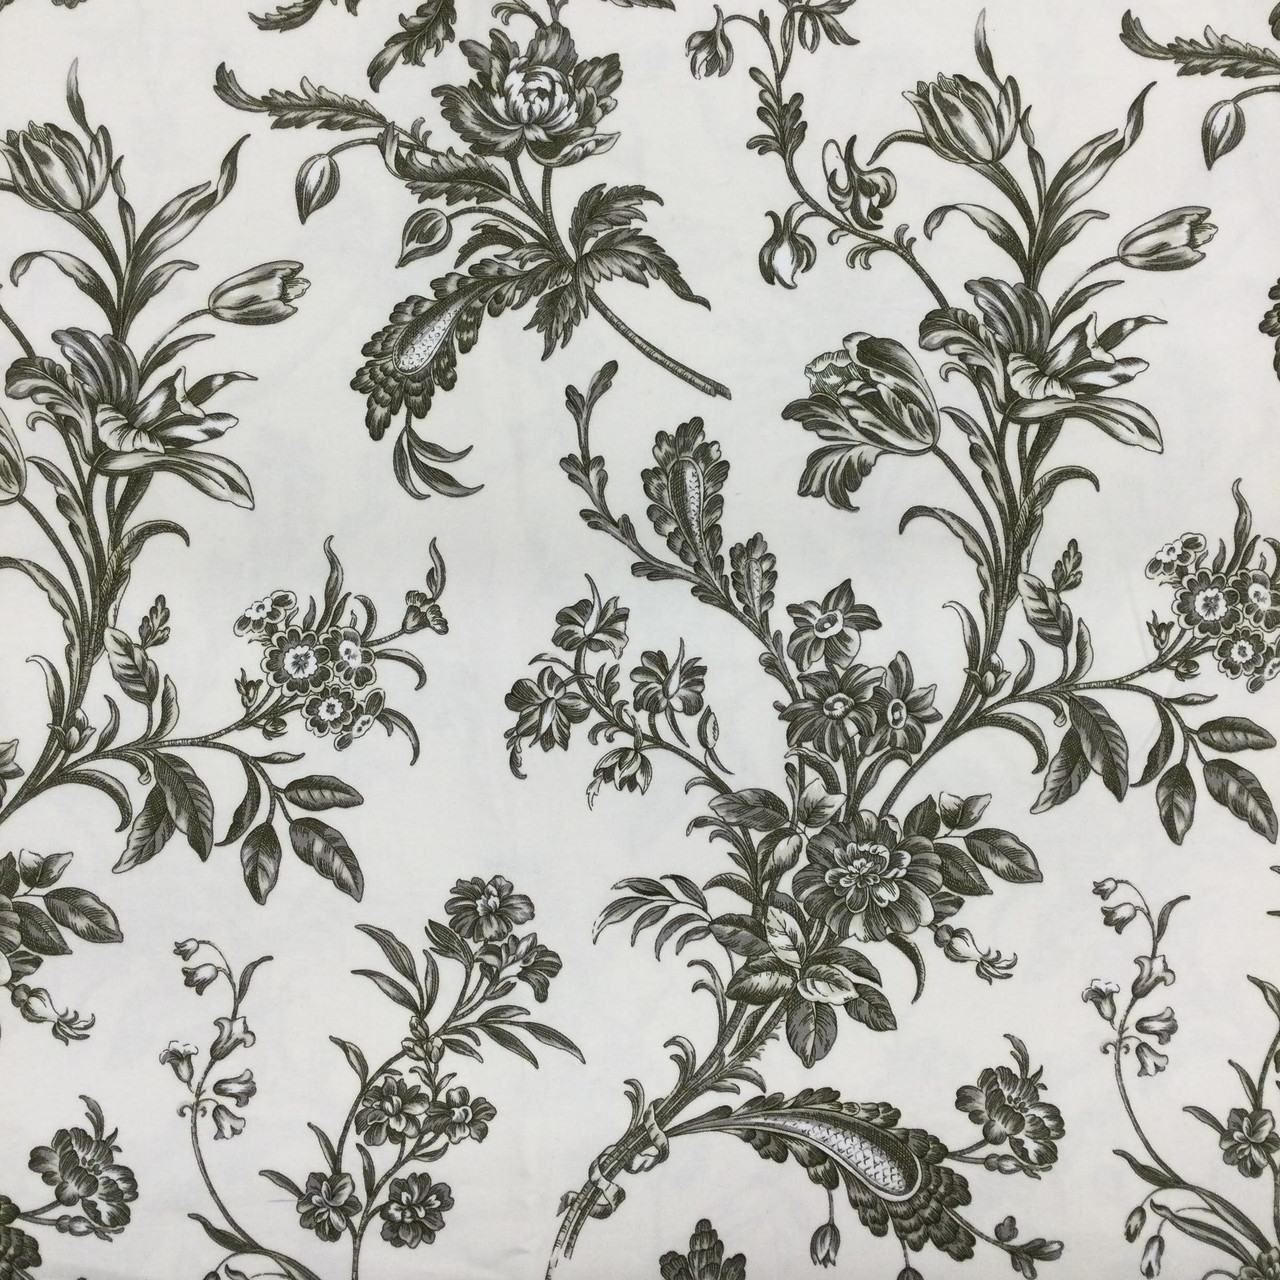 Floral Fabric by the Yard, Spring Season Illustration with Greyscale  Backdrop Nature Composition, Decorative Upholstery Fabric for Chairs & Home